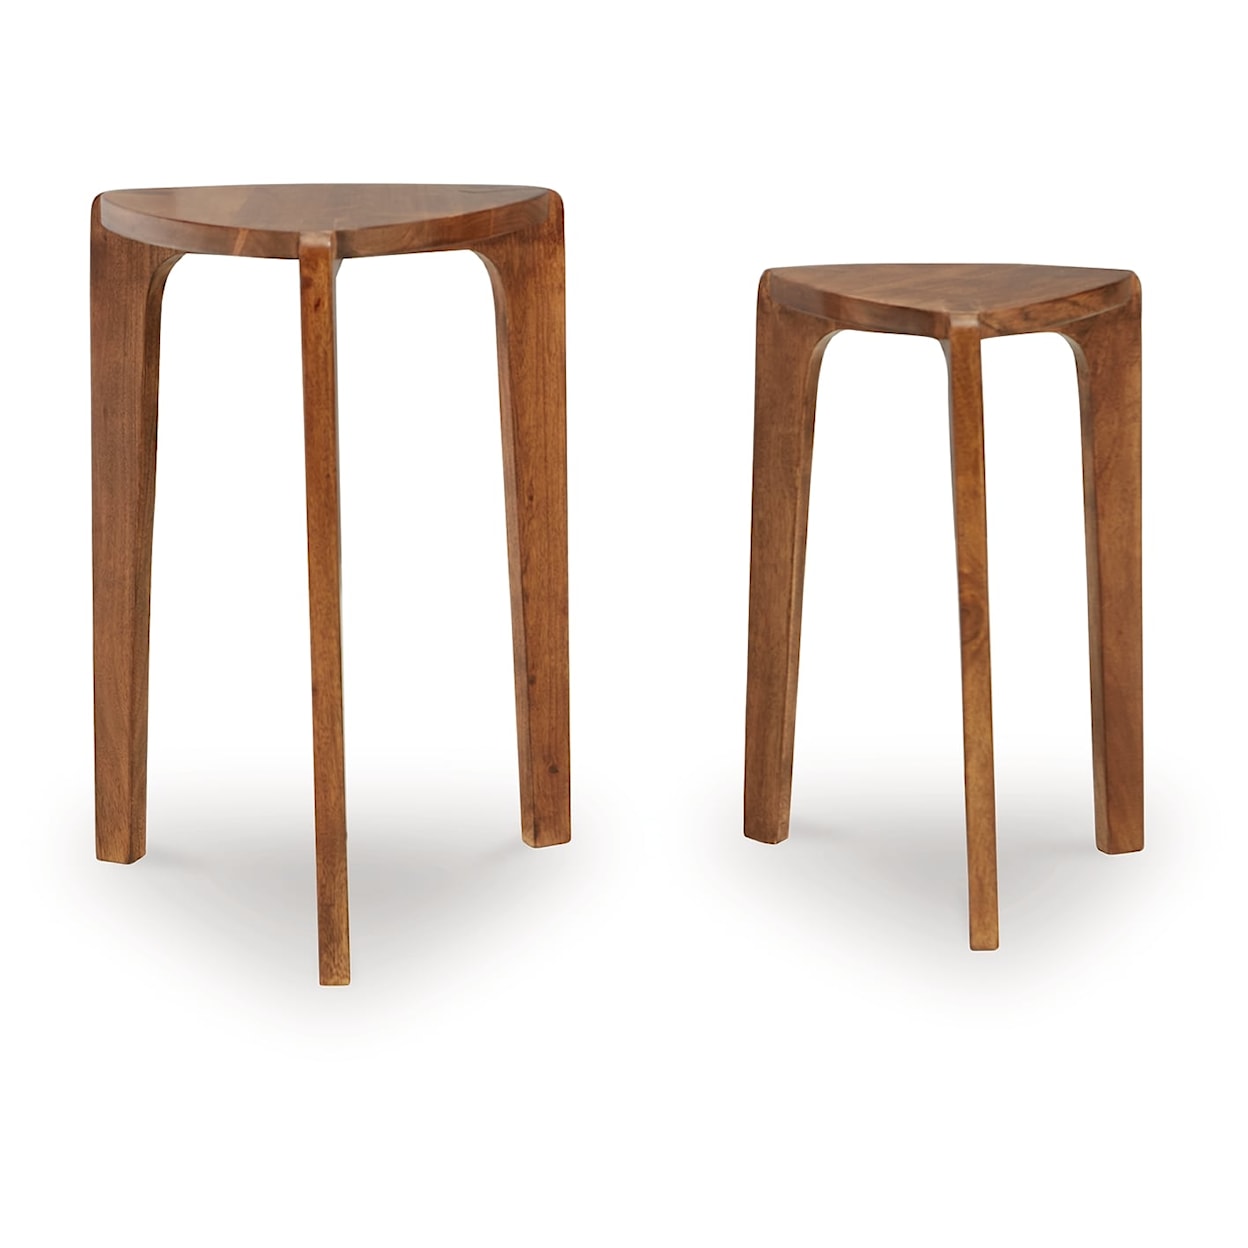 Michael Alan Select Brynnleigh Accent Table (Set Of 2)